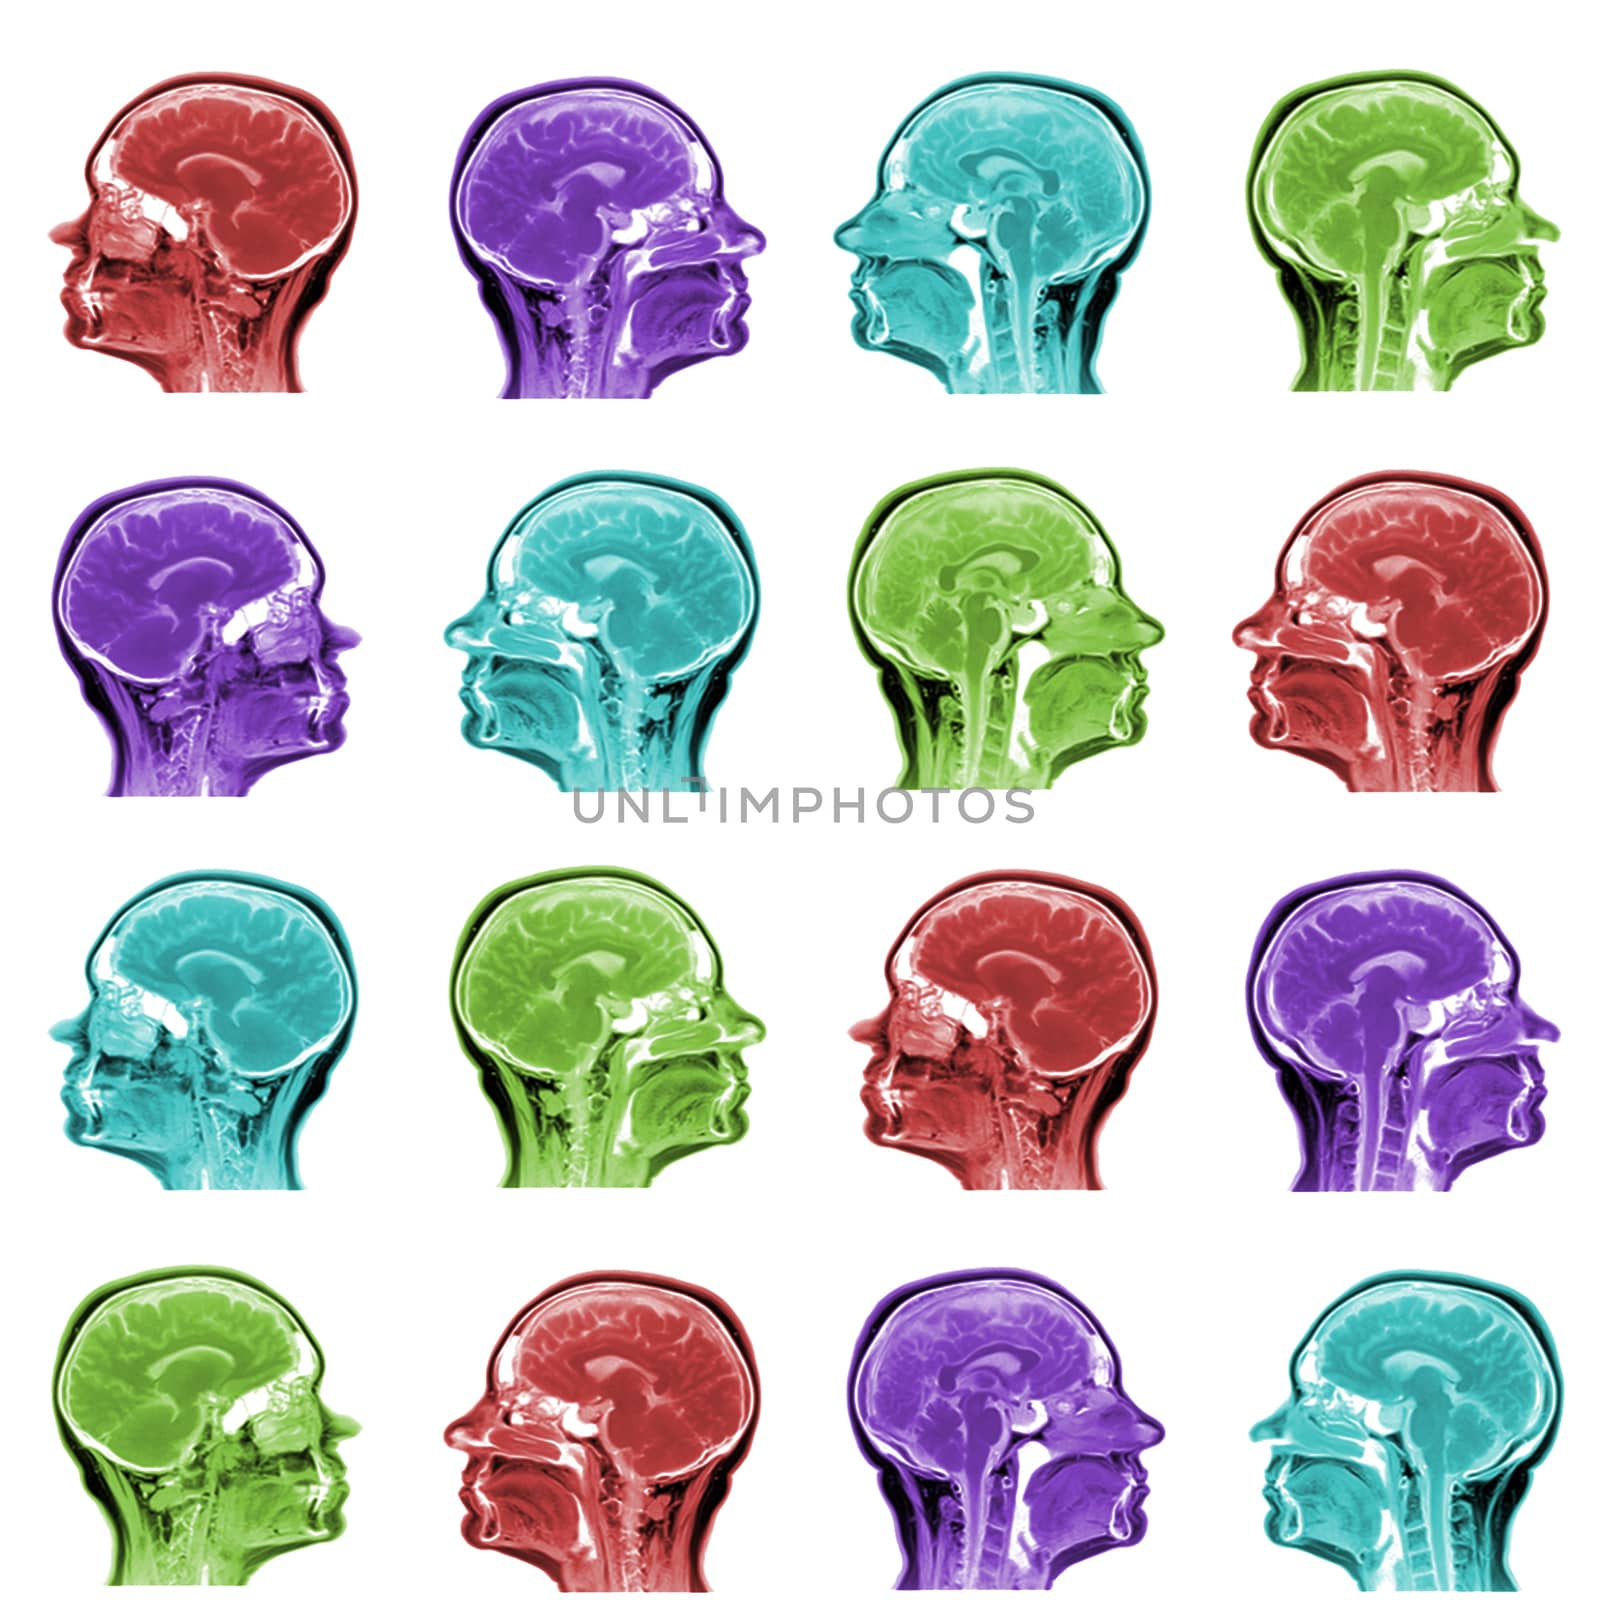 seamless pattern of MRI scans of sixty years old caucasian female head in sagittal or longitudinal plane - colored heads on white background.